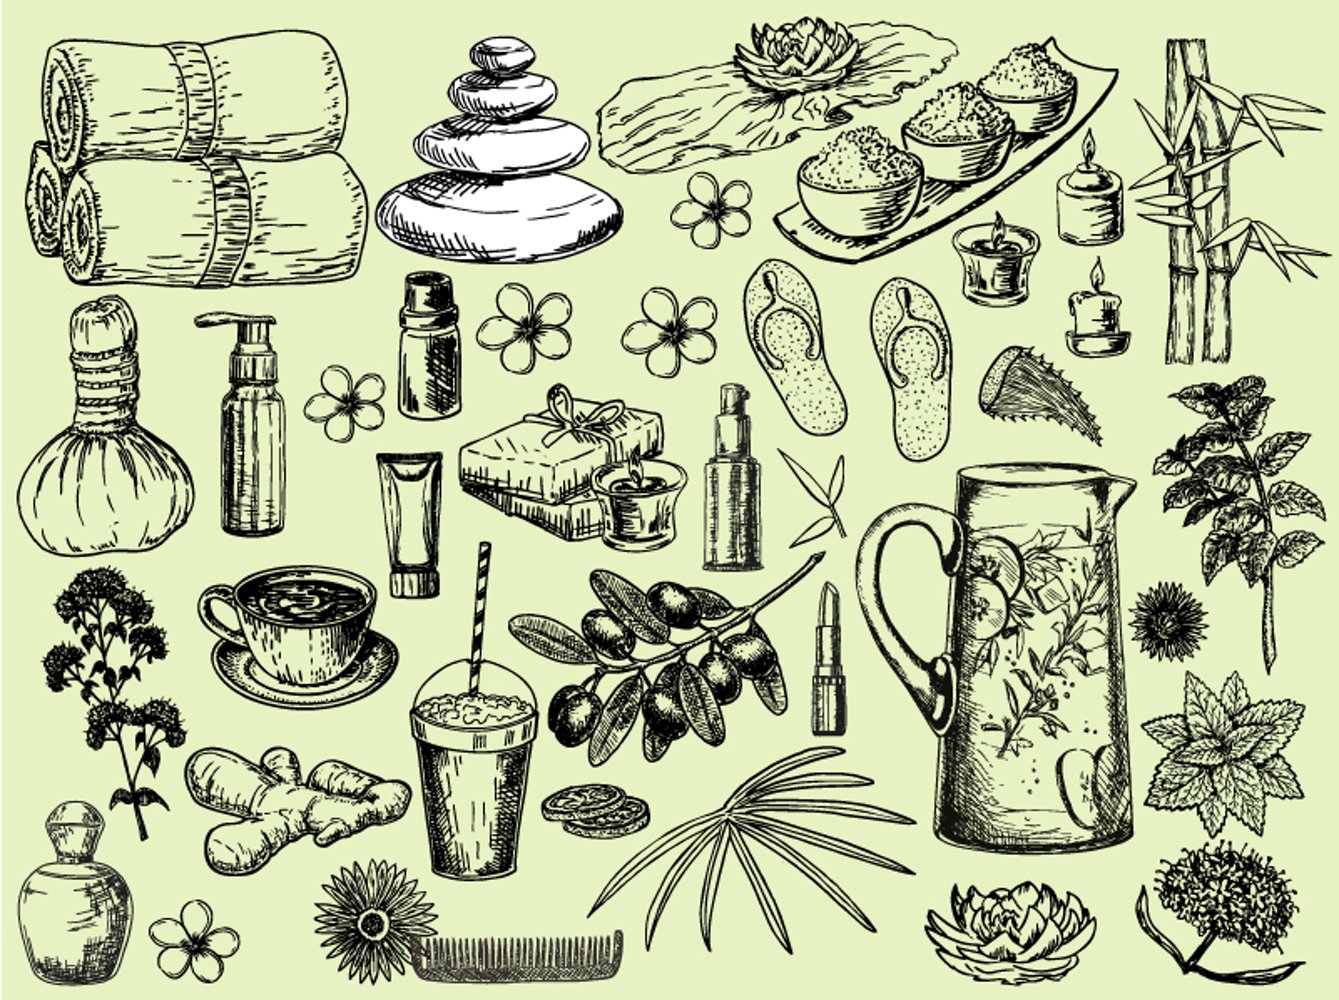 There are so many vector clipart about beauty care and spa treatments.